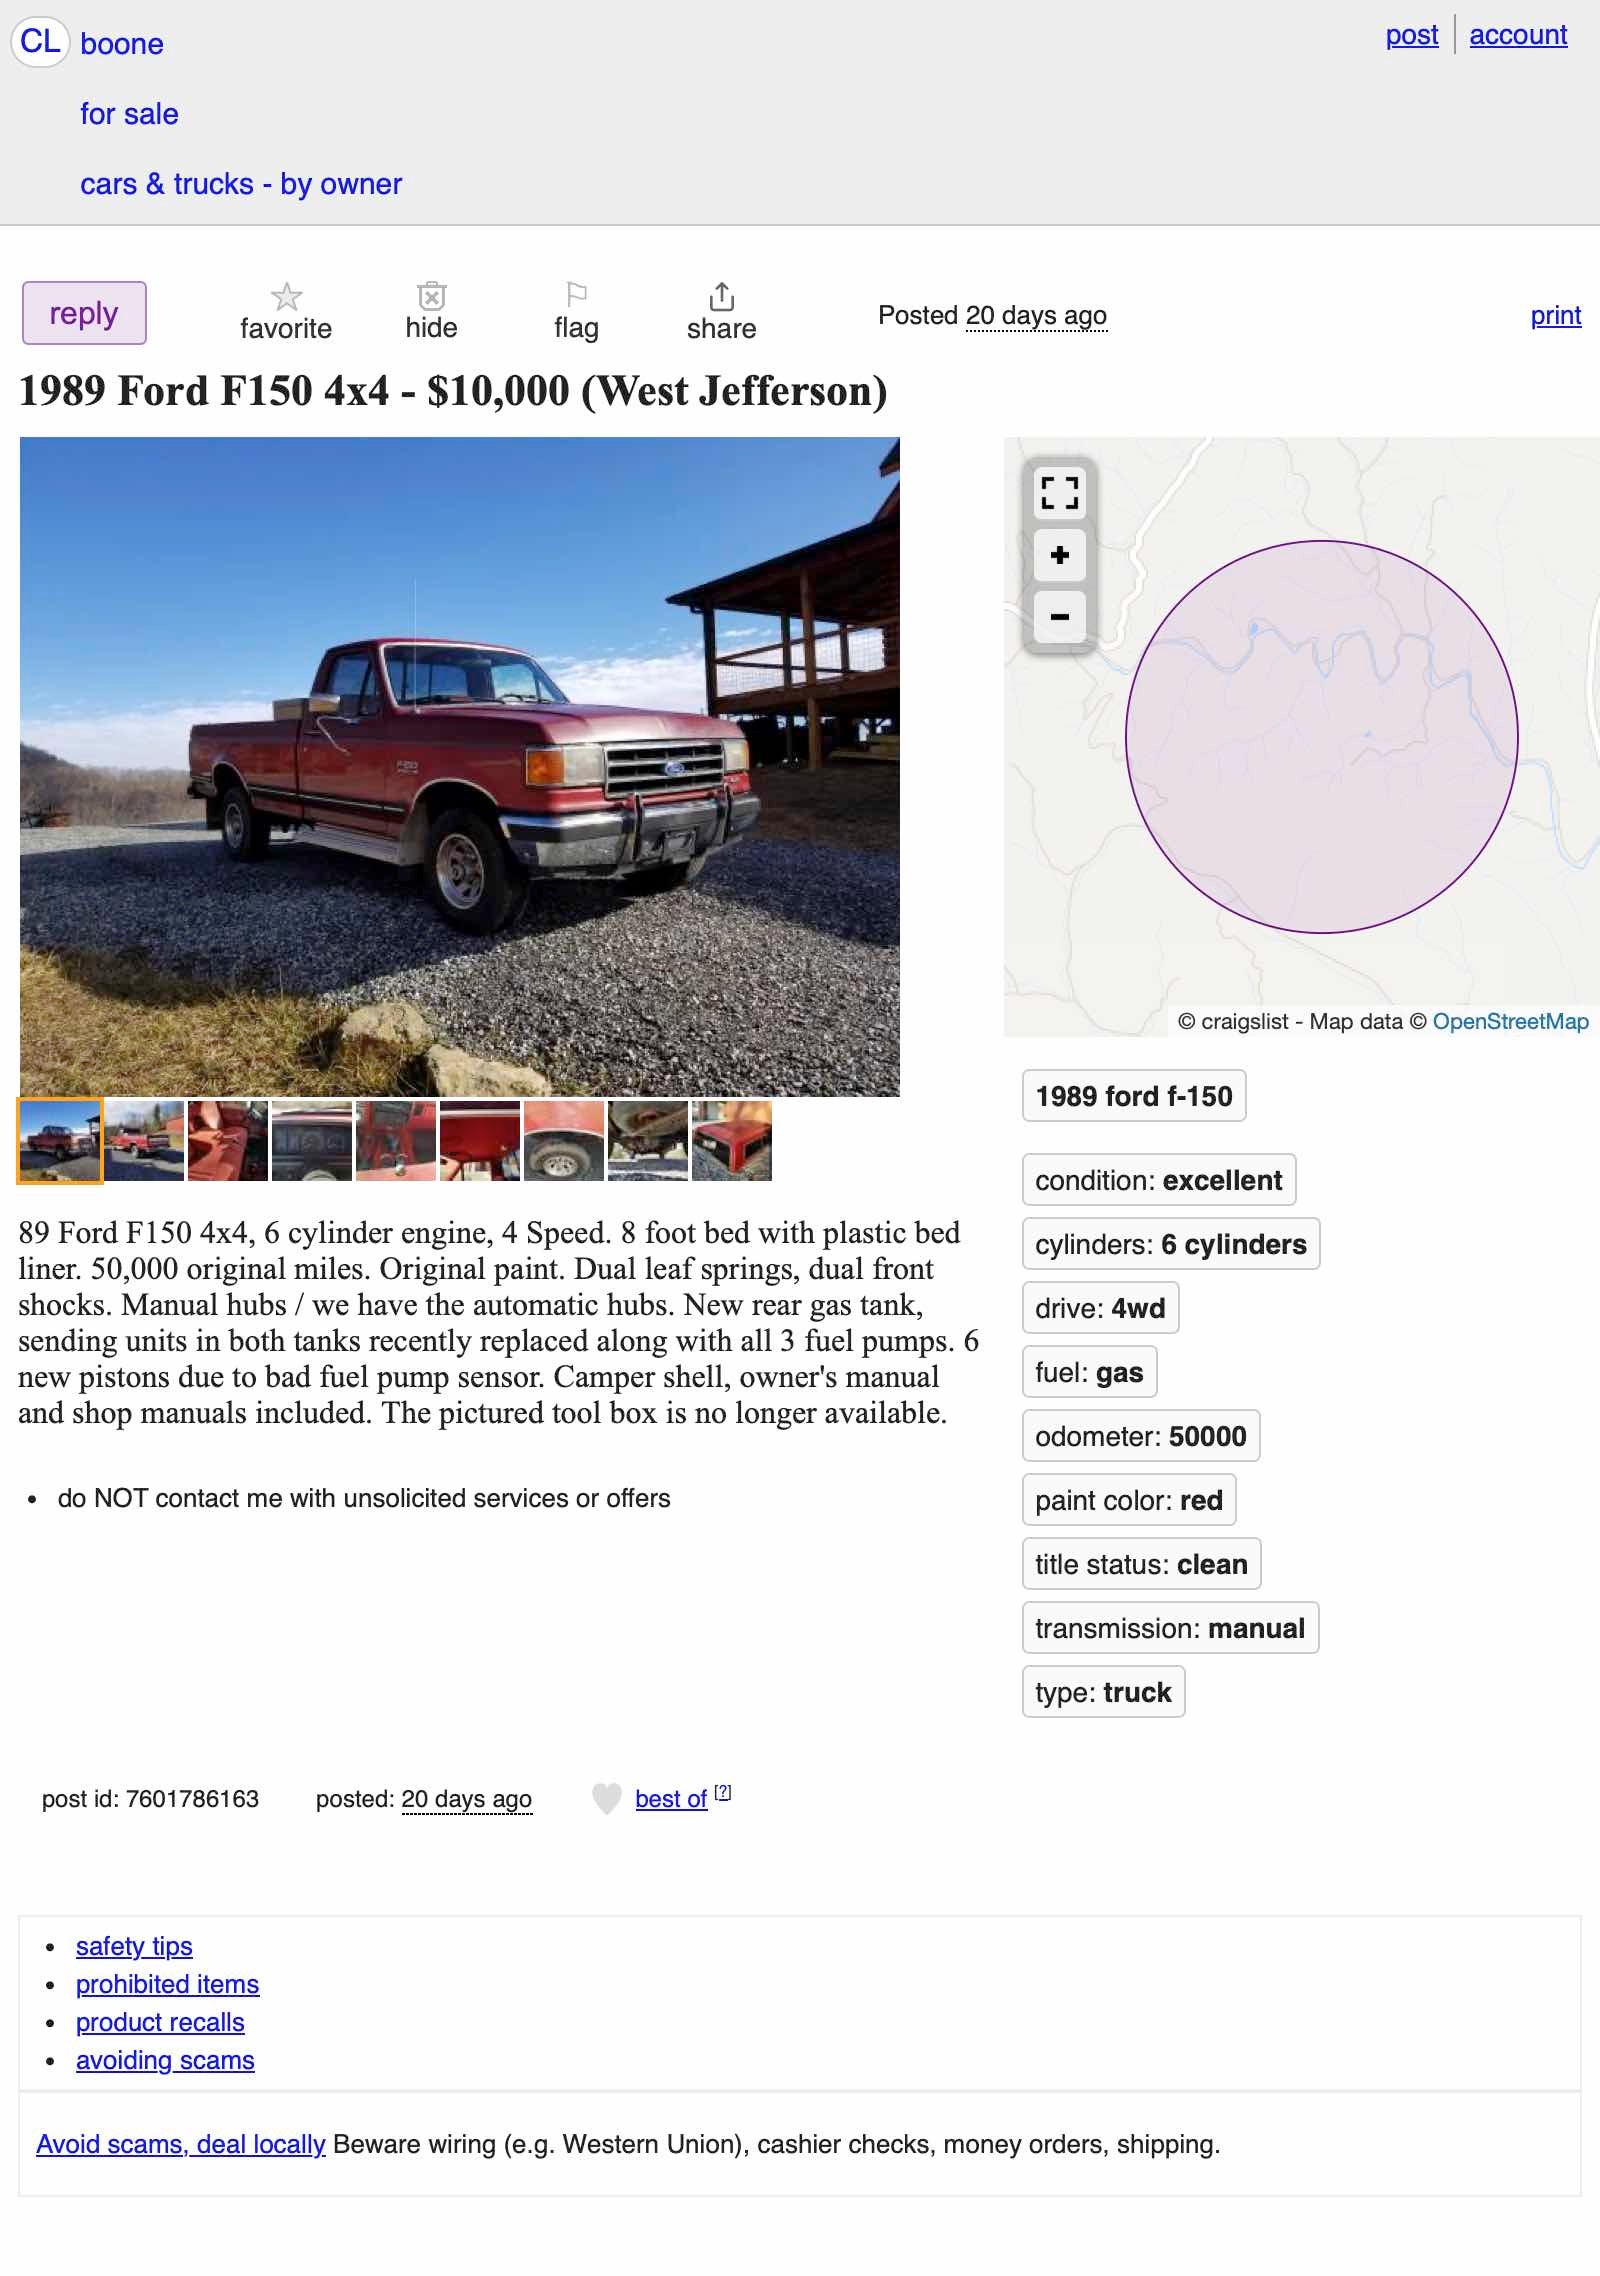 at $10,000, is this 1989 ford f-150 4x4 a square deal?